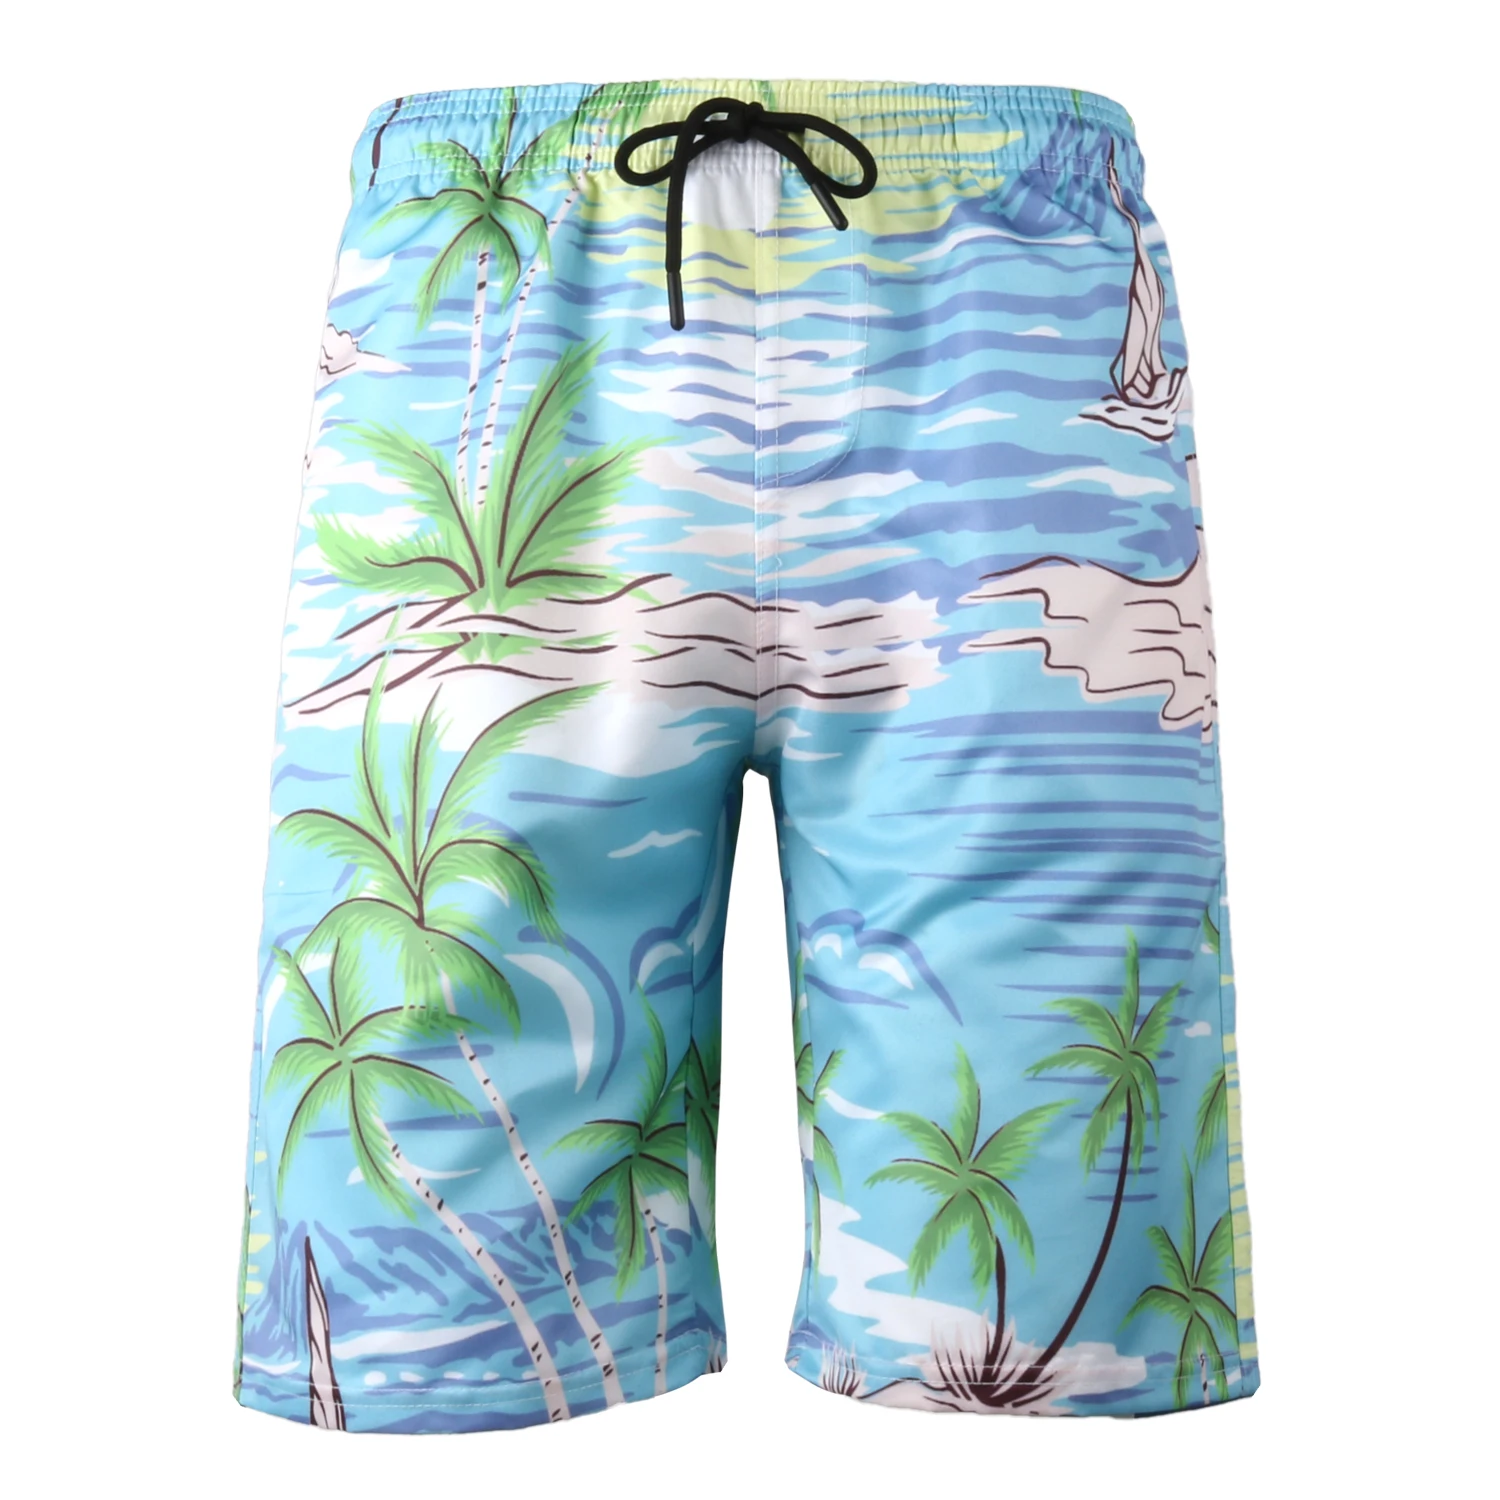 

High Quality Sublimation short mens swimming trunks waterproof pockets latest surf board shorts, Printed brilliantly